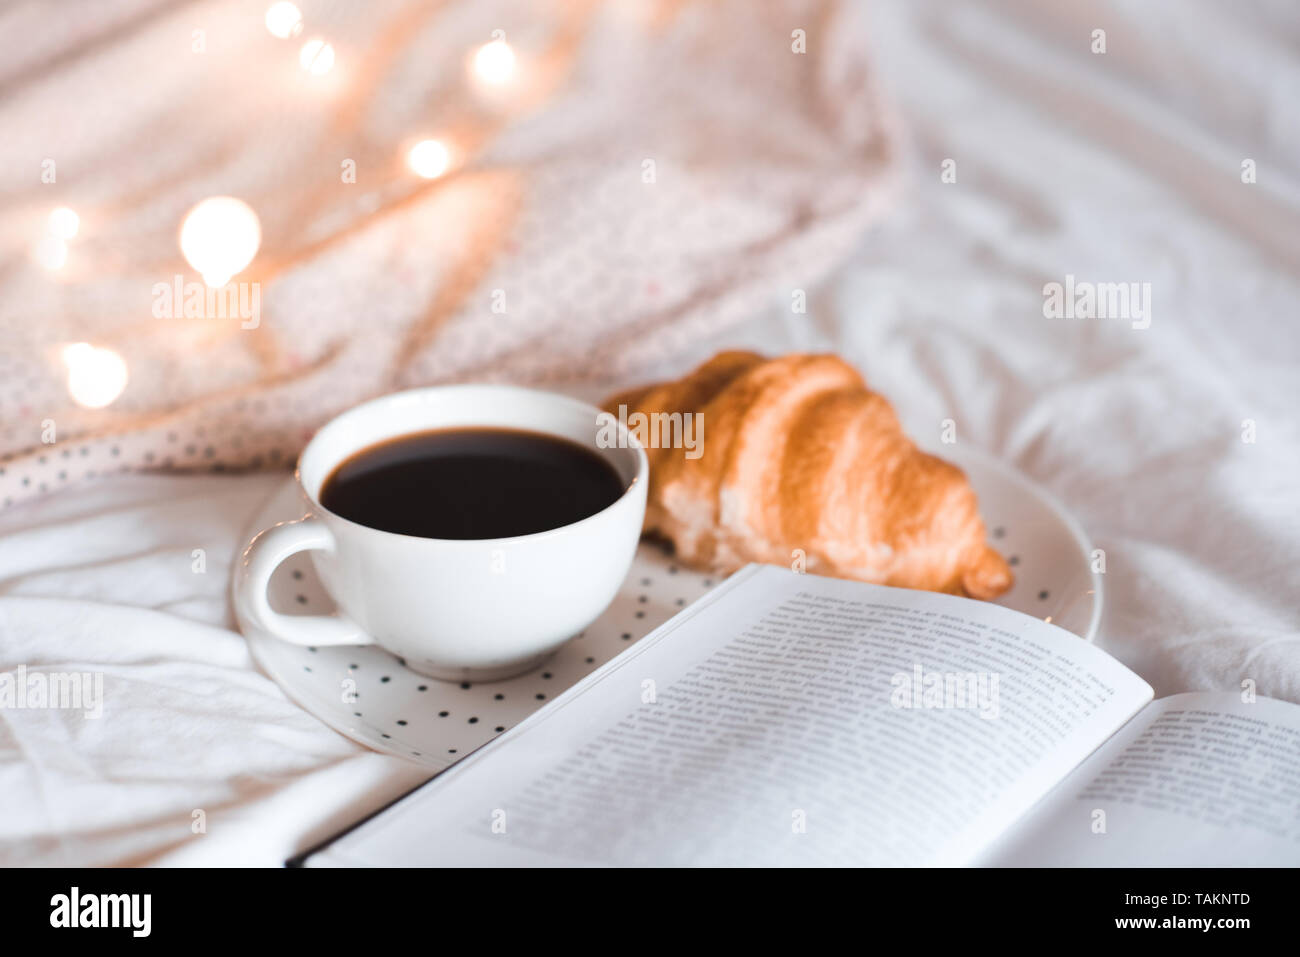 Tasty breakfast with cup of coffee and french croissant closeup. Good morning. Stock Photo